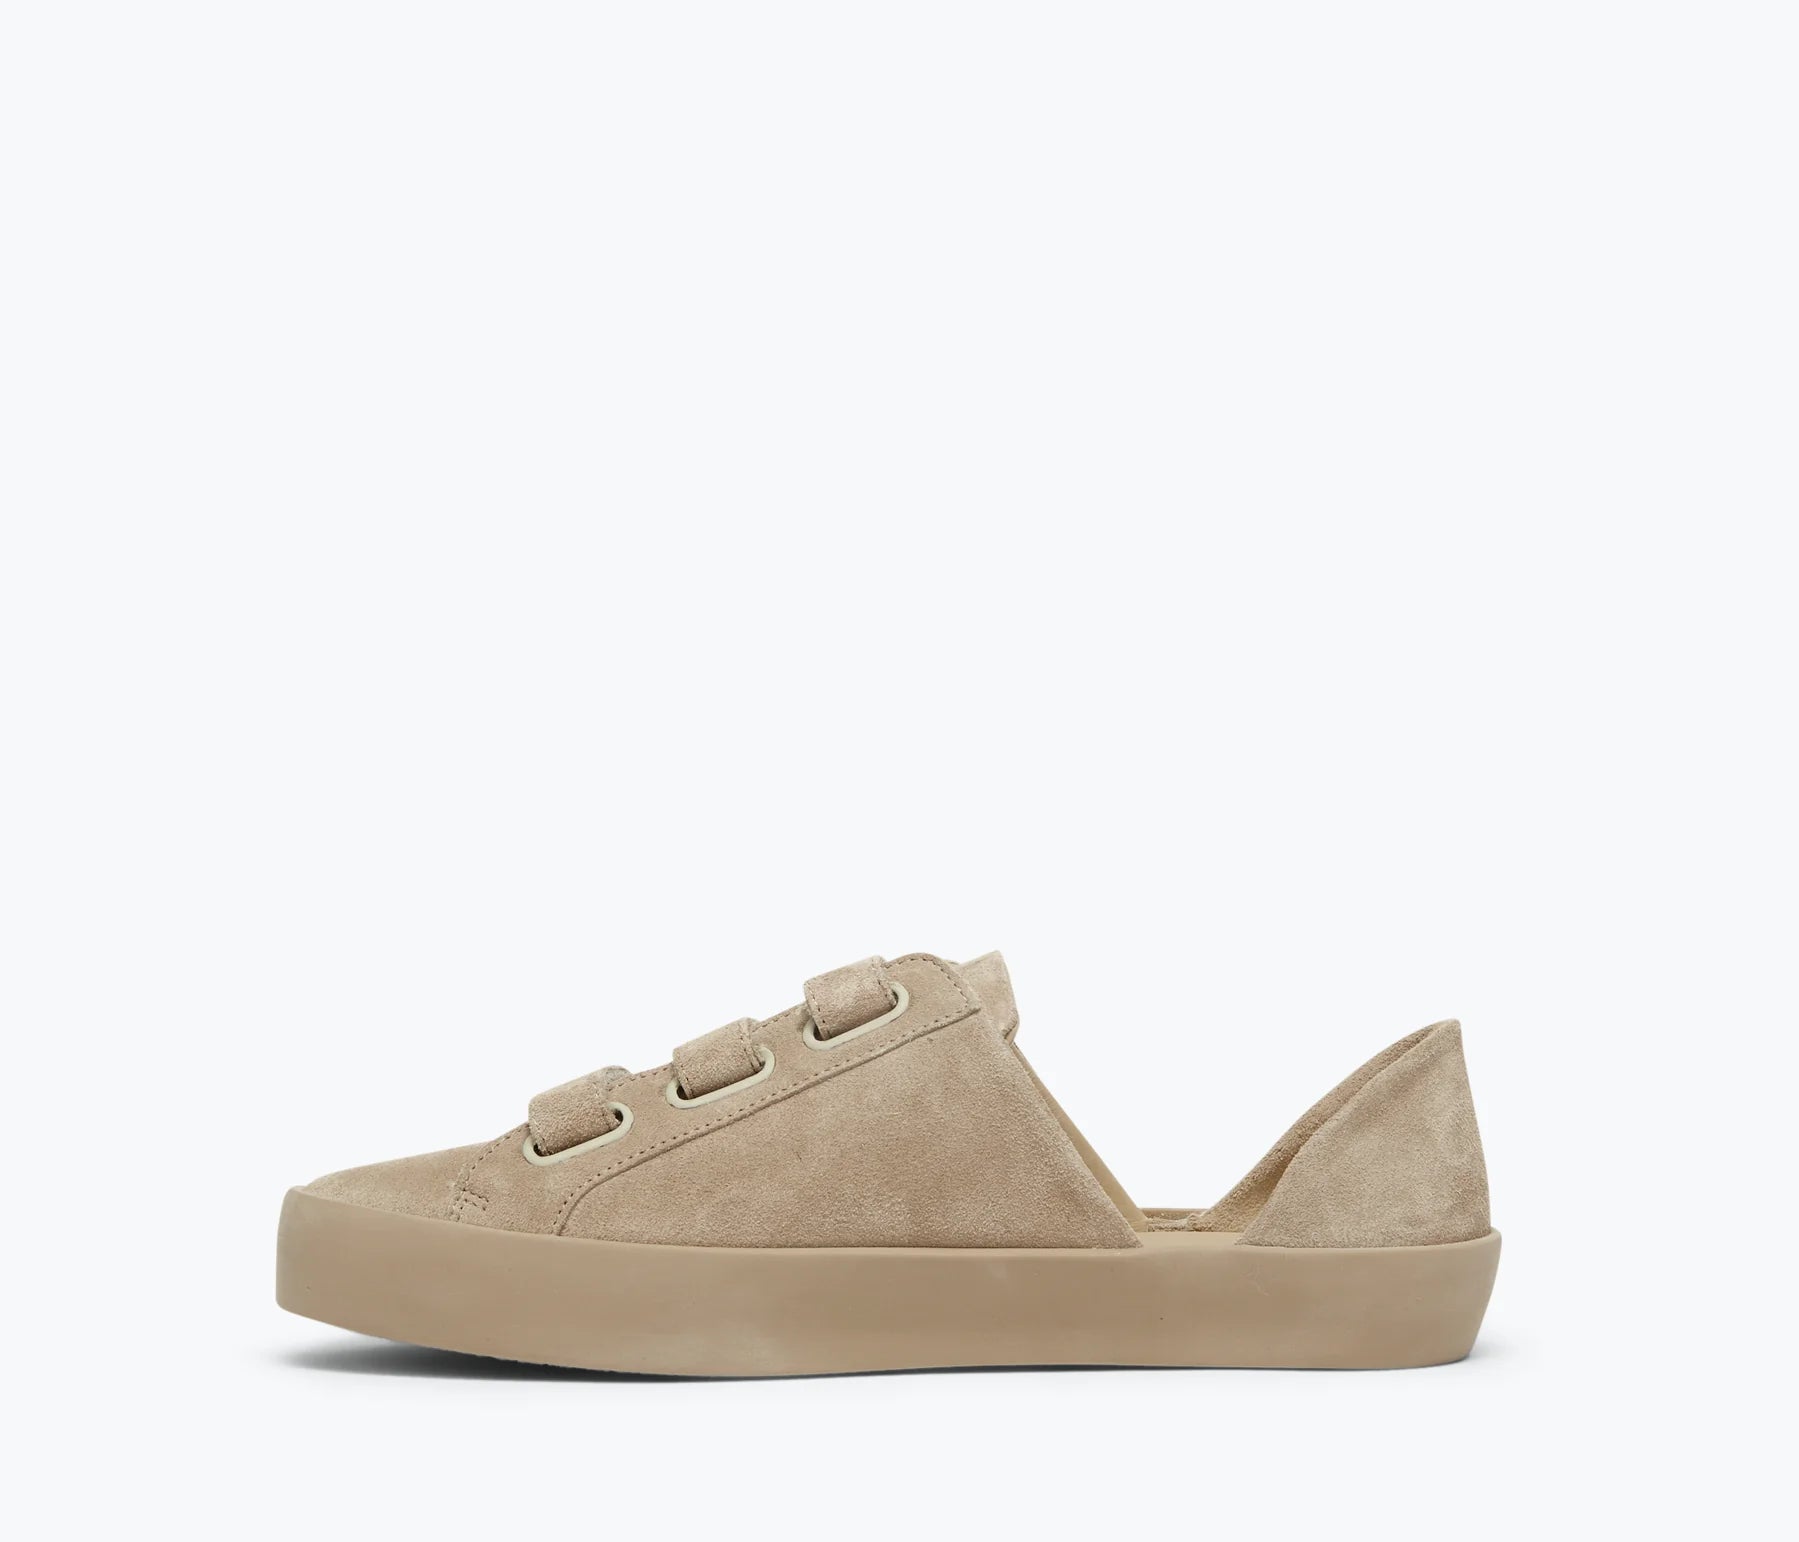 LIBBY D'ORSAY SNEAKER - STUCCO SUEDE